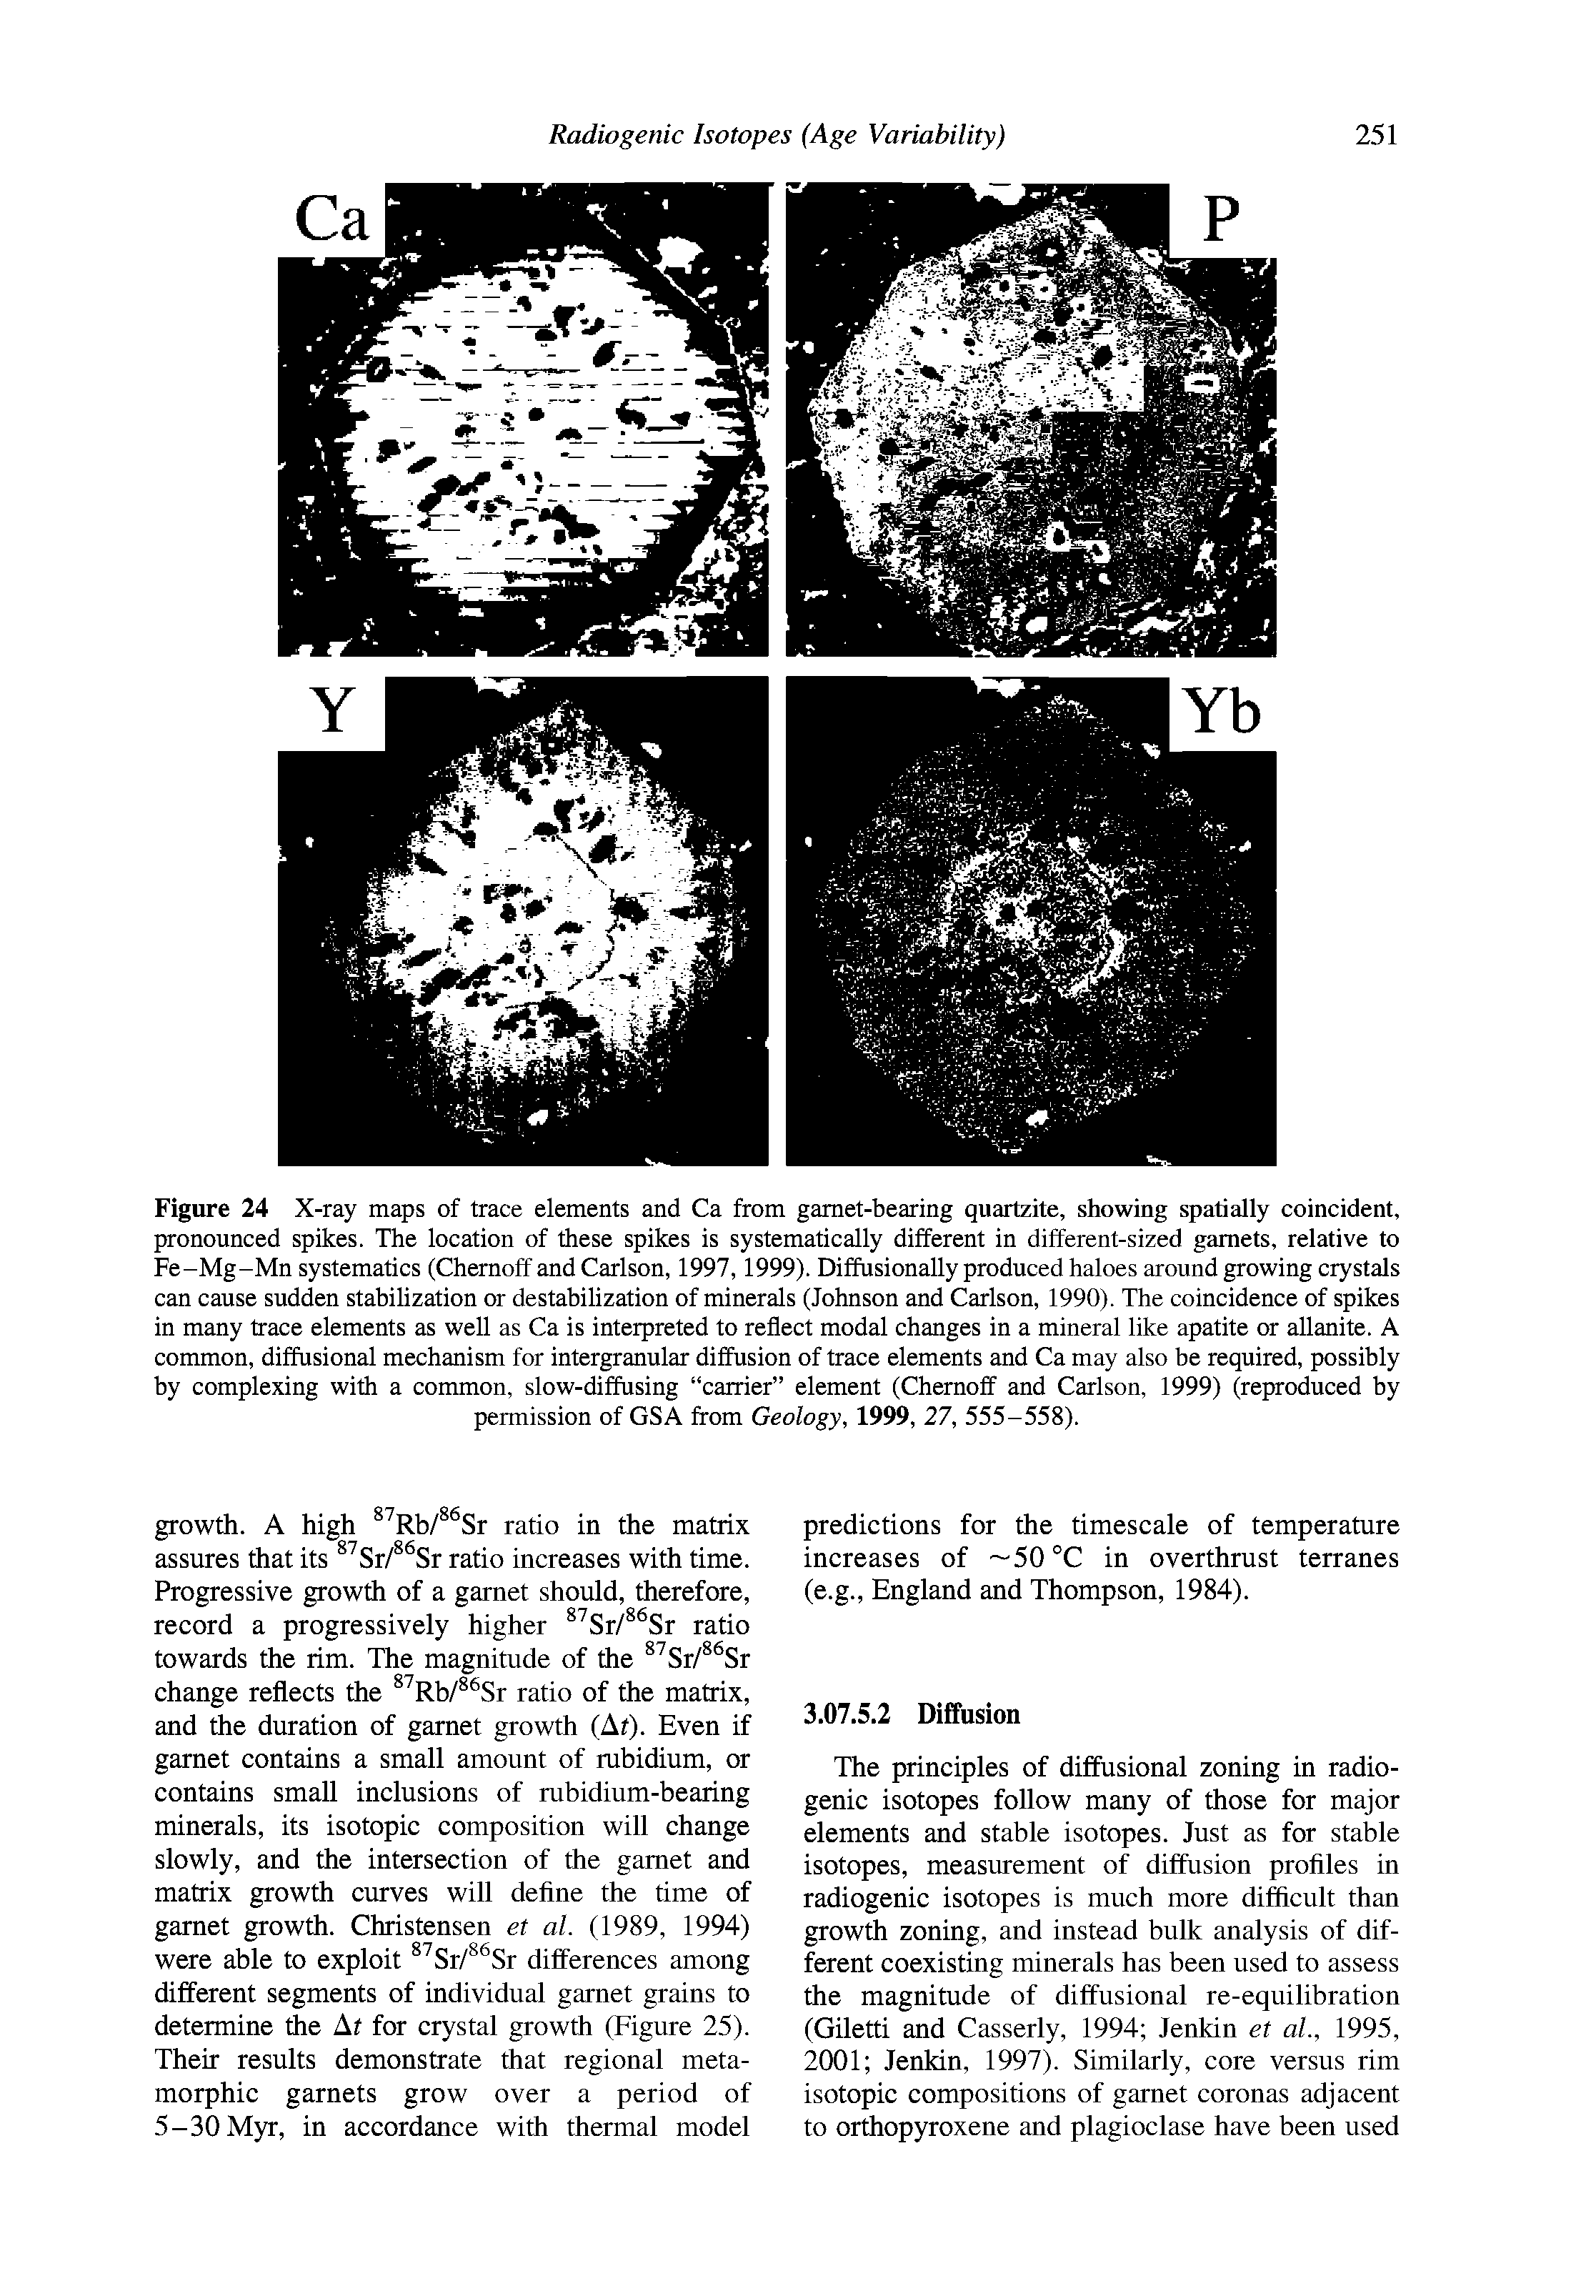 Figure 24 X-ray maps of trace elements and Ca from garnet-bearing quartzite, showing spatially coincident, pronounced spikes. The location of these spikes is systematically different in different-sized garnets, relative to Fe-Mg-Mn systematics (Chernoff and Carlson, 1997,1999). Diffusionally produced haloes around growing crystals can cause sudden stabilization or destabilization of minerals (Johnson and Carlson, 1990). The coincidence of spikes in many trace elements as well as Ca is interpreted to reflect modal changes in a mineral like apatite or allanite. A common, diffusional mechanism for intergranular diffusion of trace elements and Ca may also be required, possibly by complexing with a common, slow-diffusing carrier element (Chernoff and Carlson, 1999) (reproduced by permission of GSA from Geology, 1999, 27, 555-558).